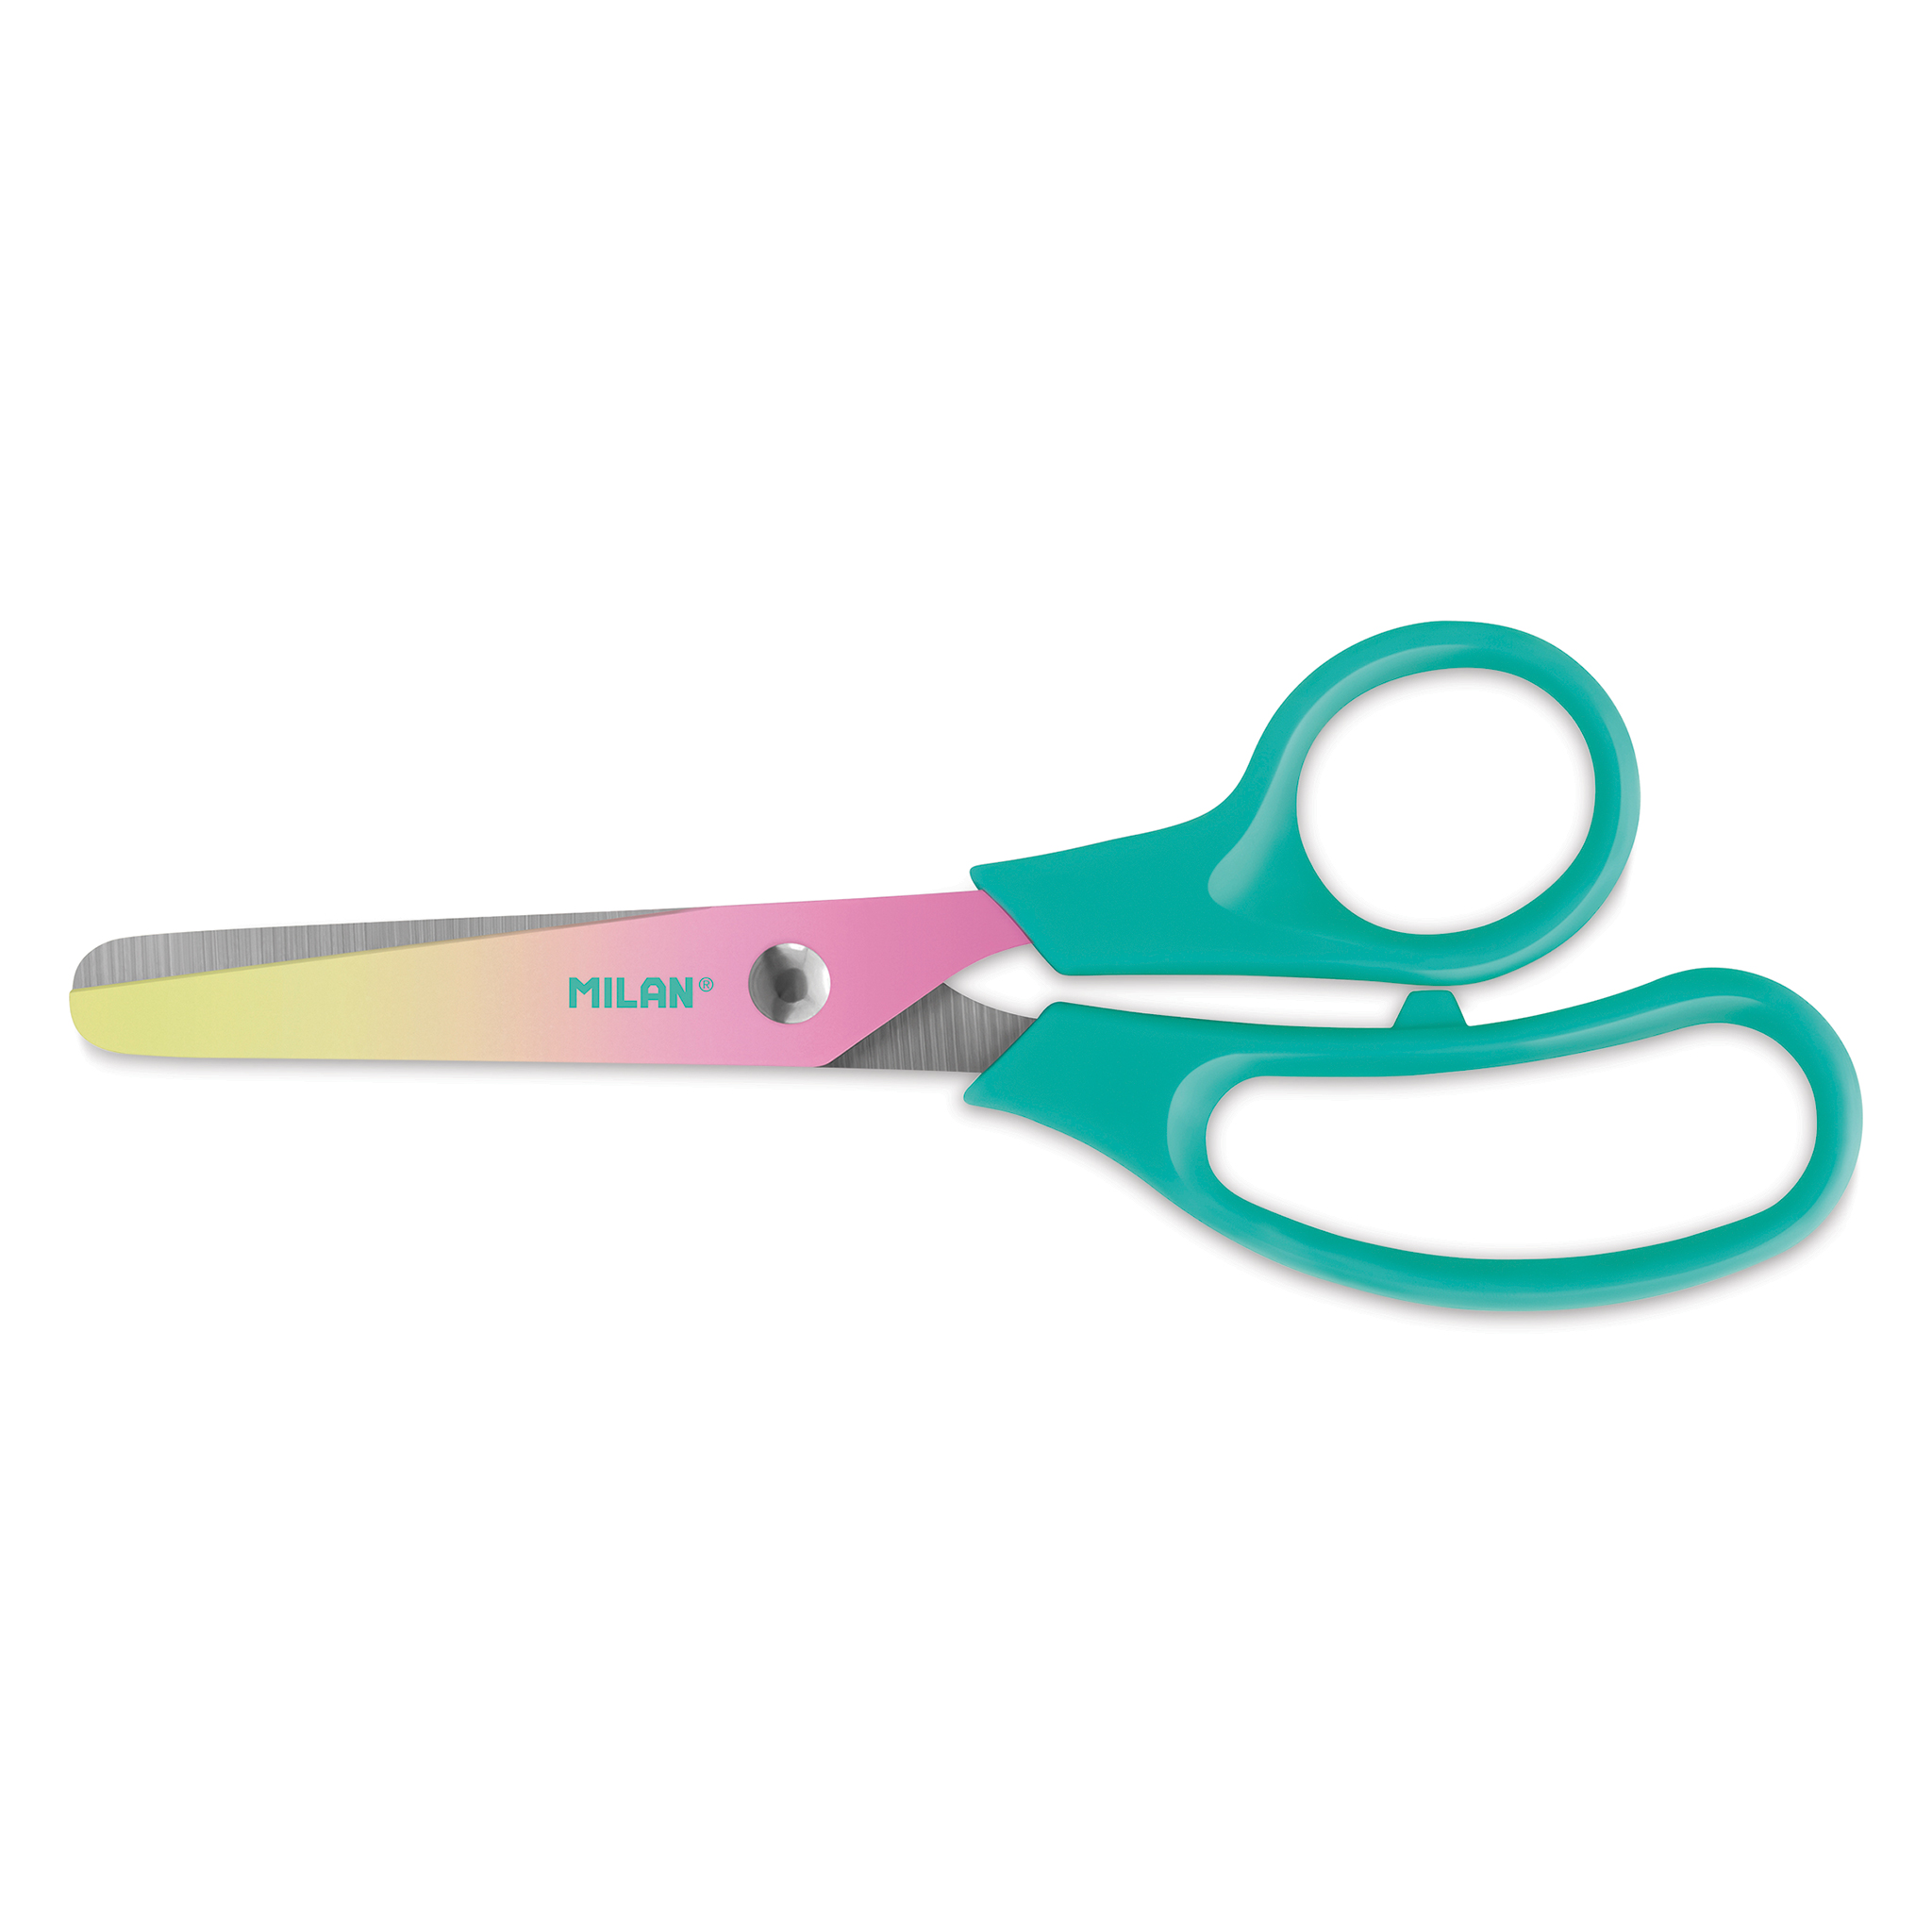 Fiskars Student Scissors, 7 inch Overall Length, Left/Right, Stainless Steel, Turquoise, Red, Lime, Blue, Pink, Purple